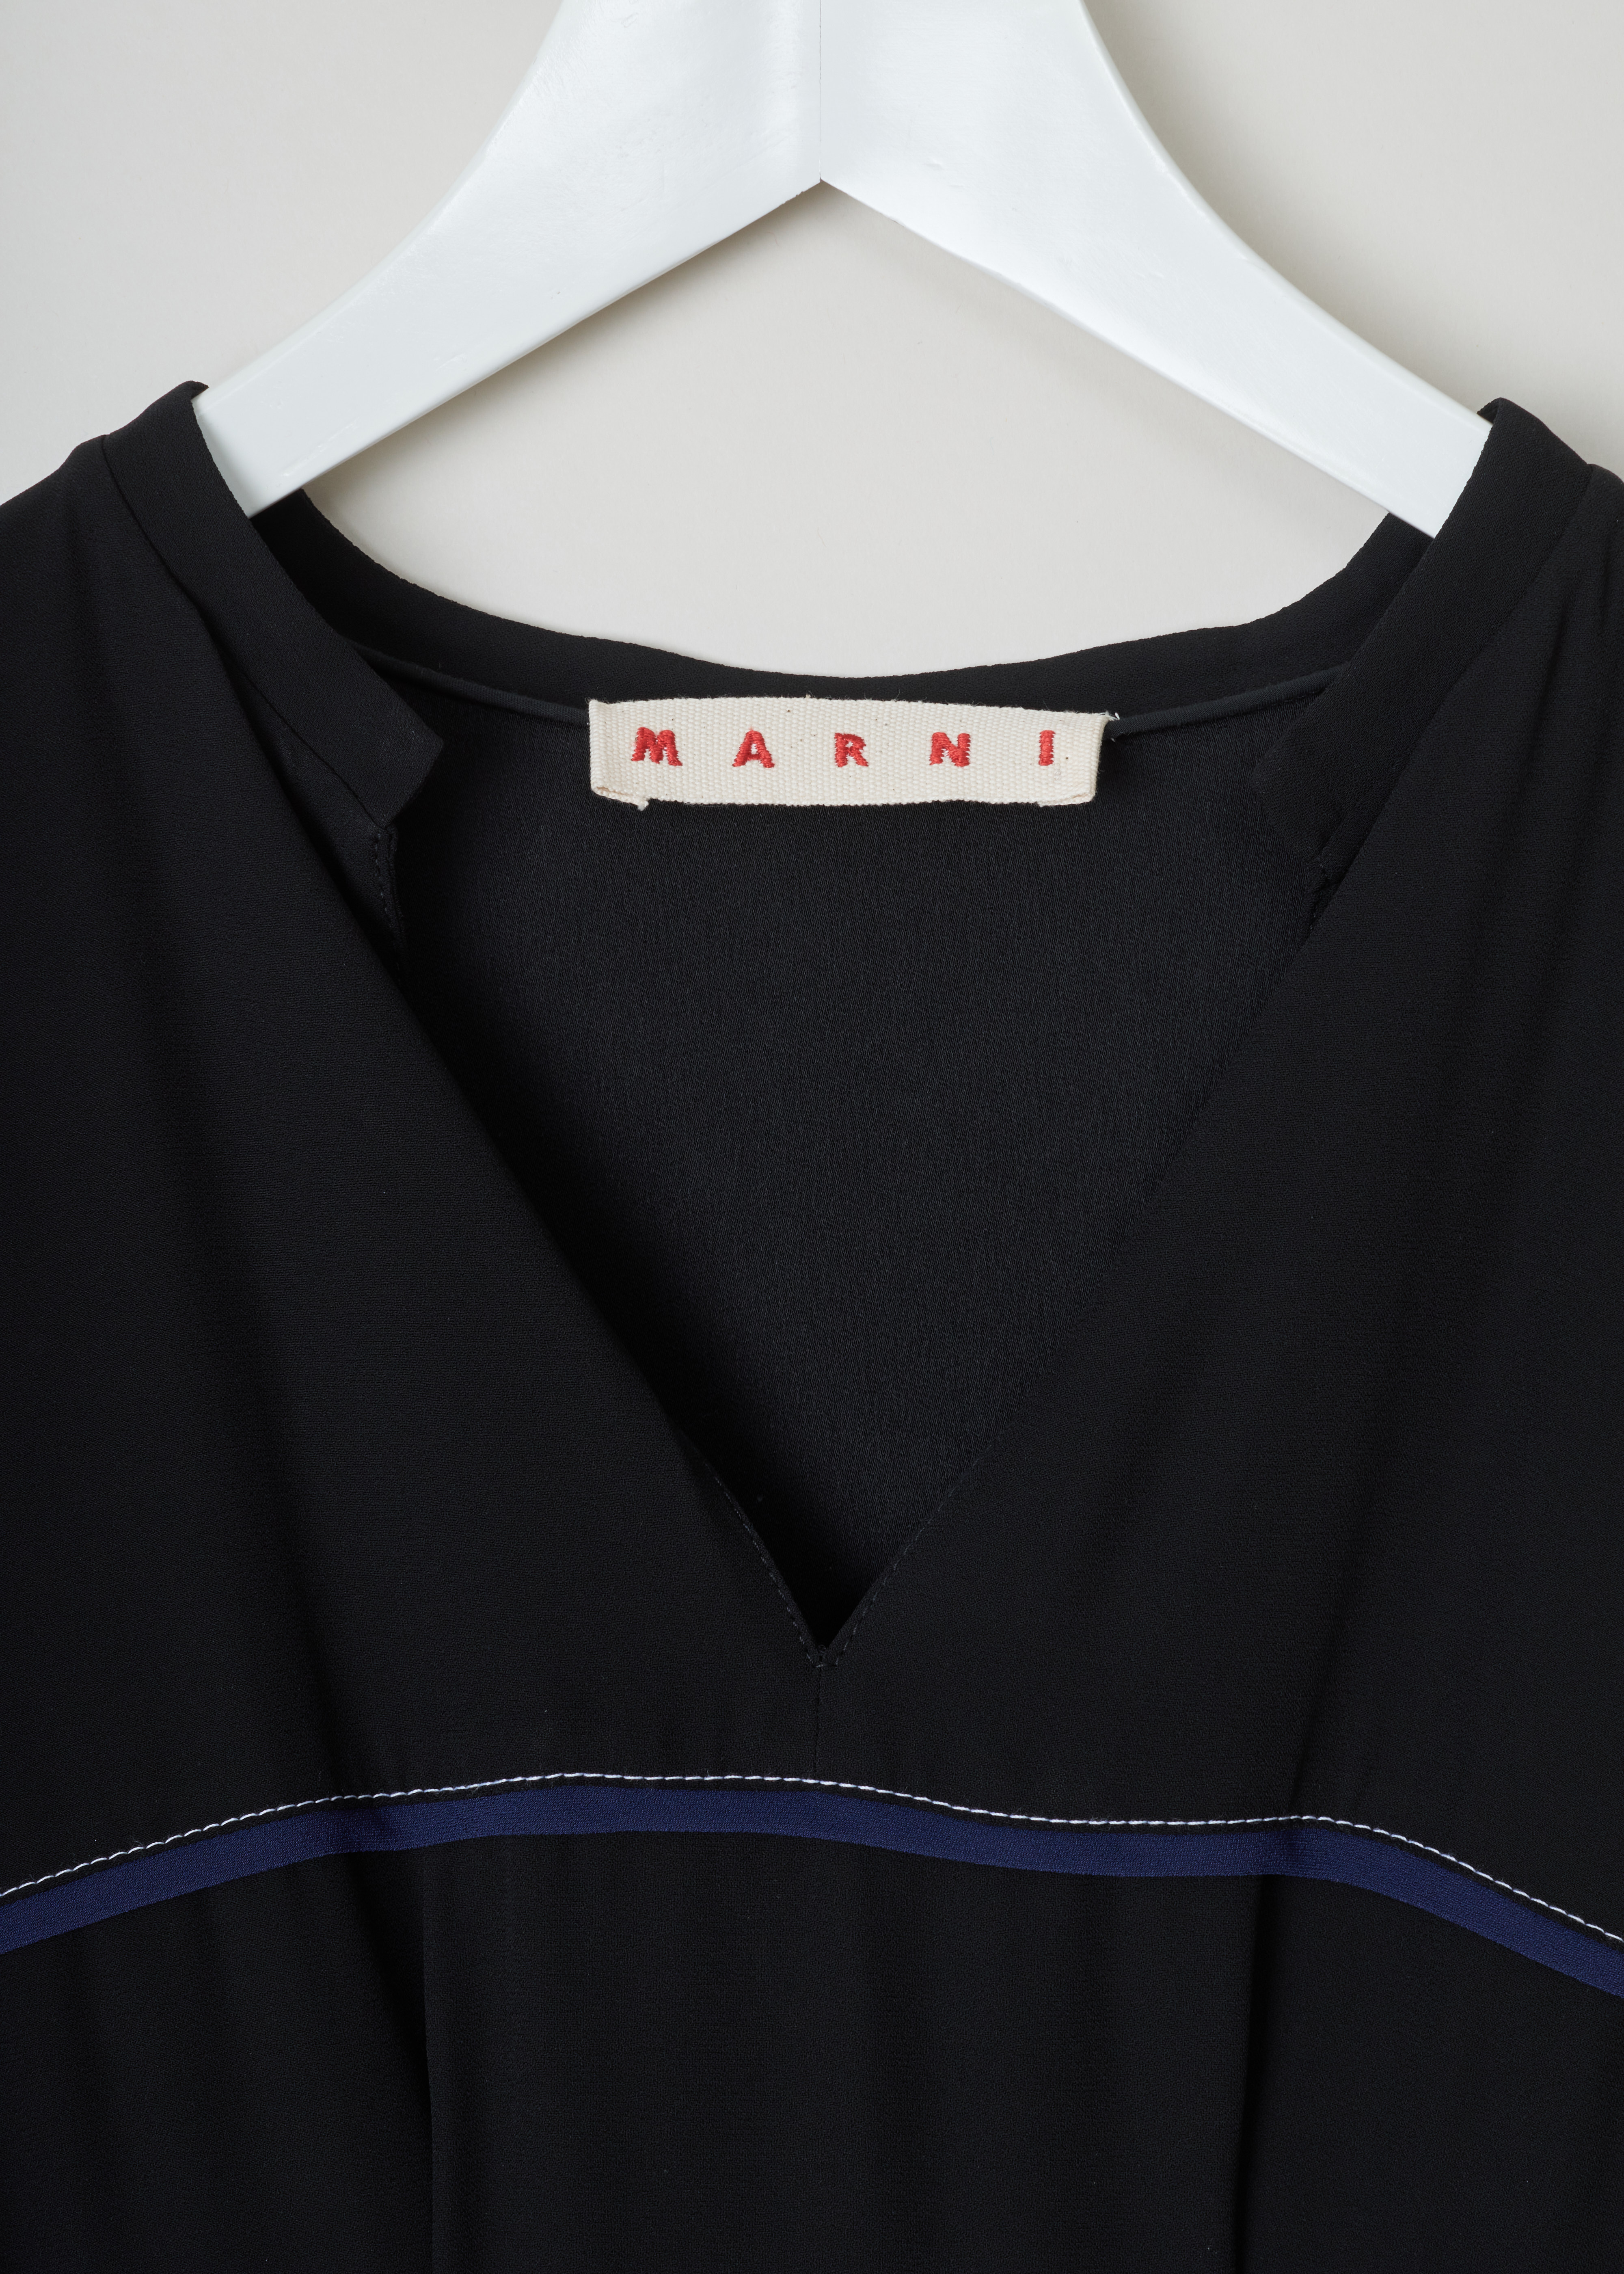 Marni Contrast stitch flared dress black ABMA032910_TV285_00N99_BLACK detail. Flared black midi-dress with white contrasting topstitching at the waist, blue bias on the chest, a V-neck, short puff sleeves and an irregular hemline.